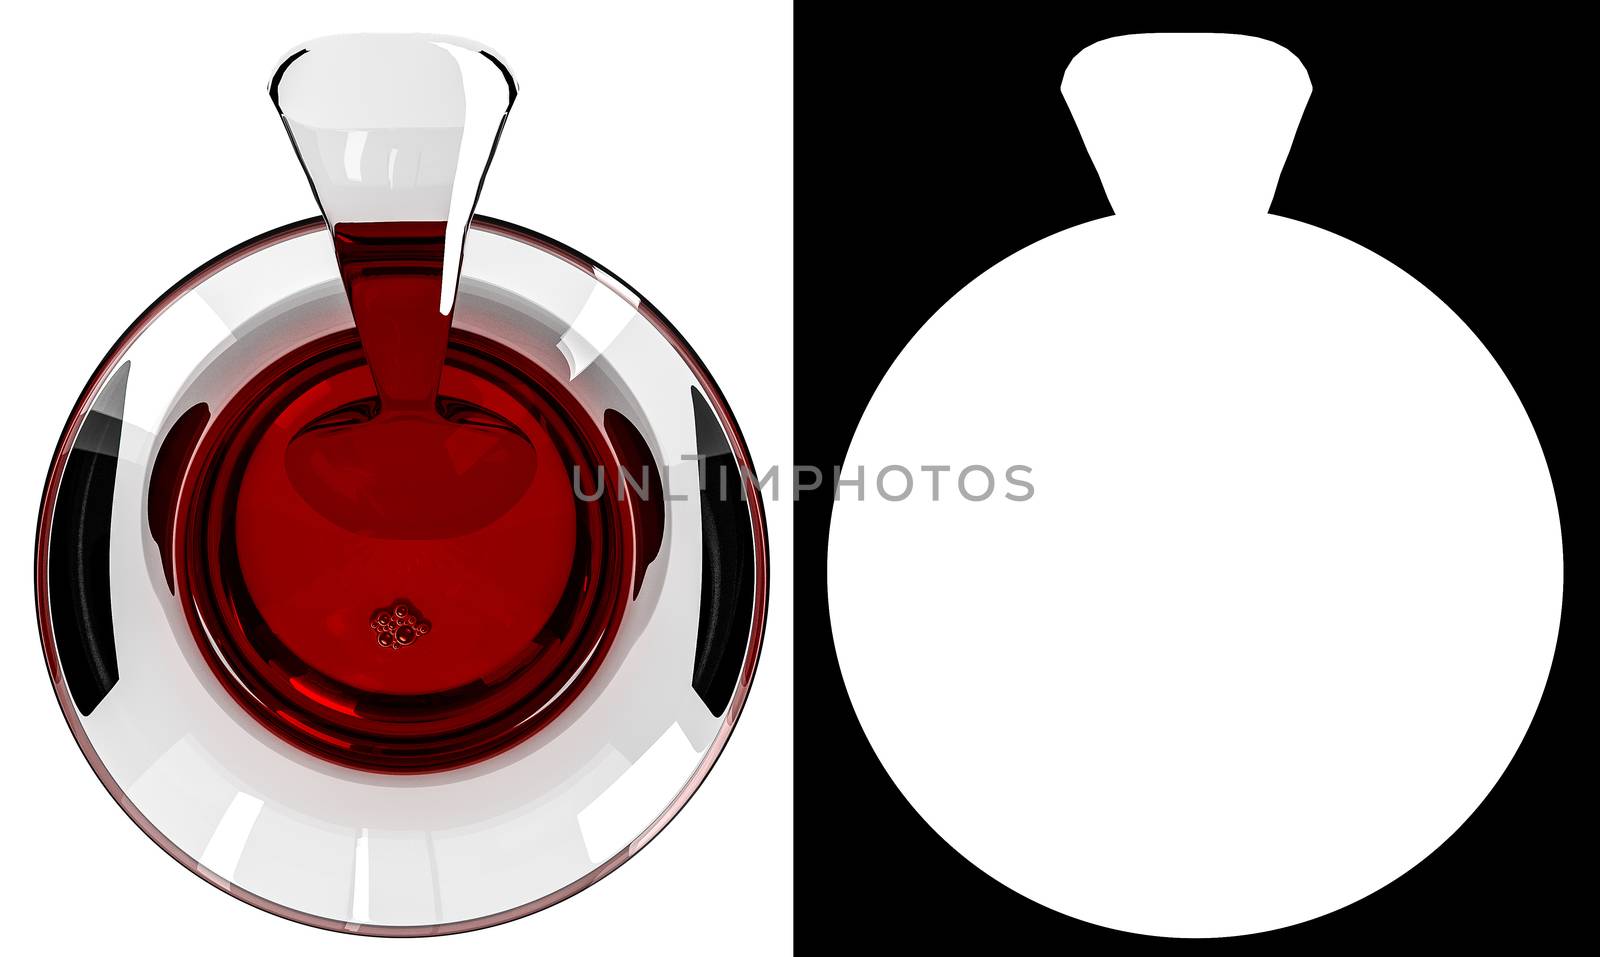 Glass of Turkish tea on white background with alpha mask